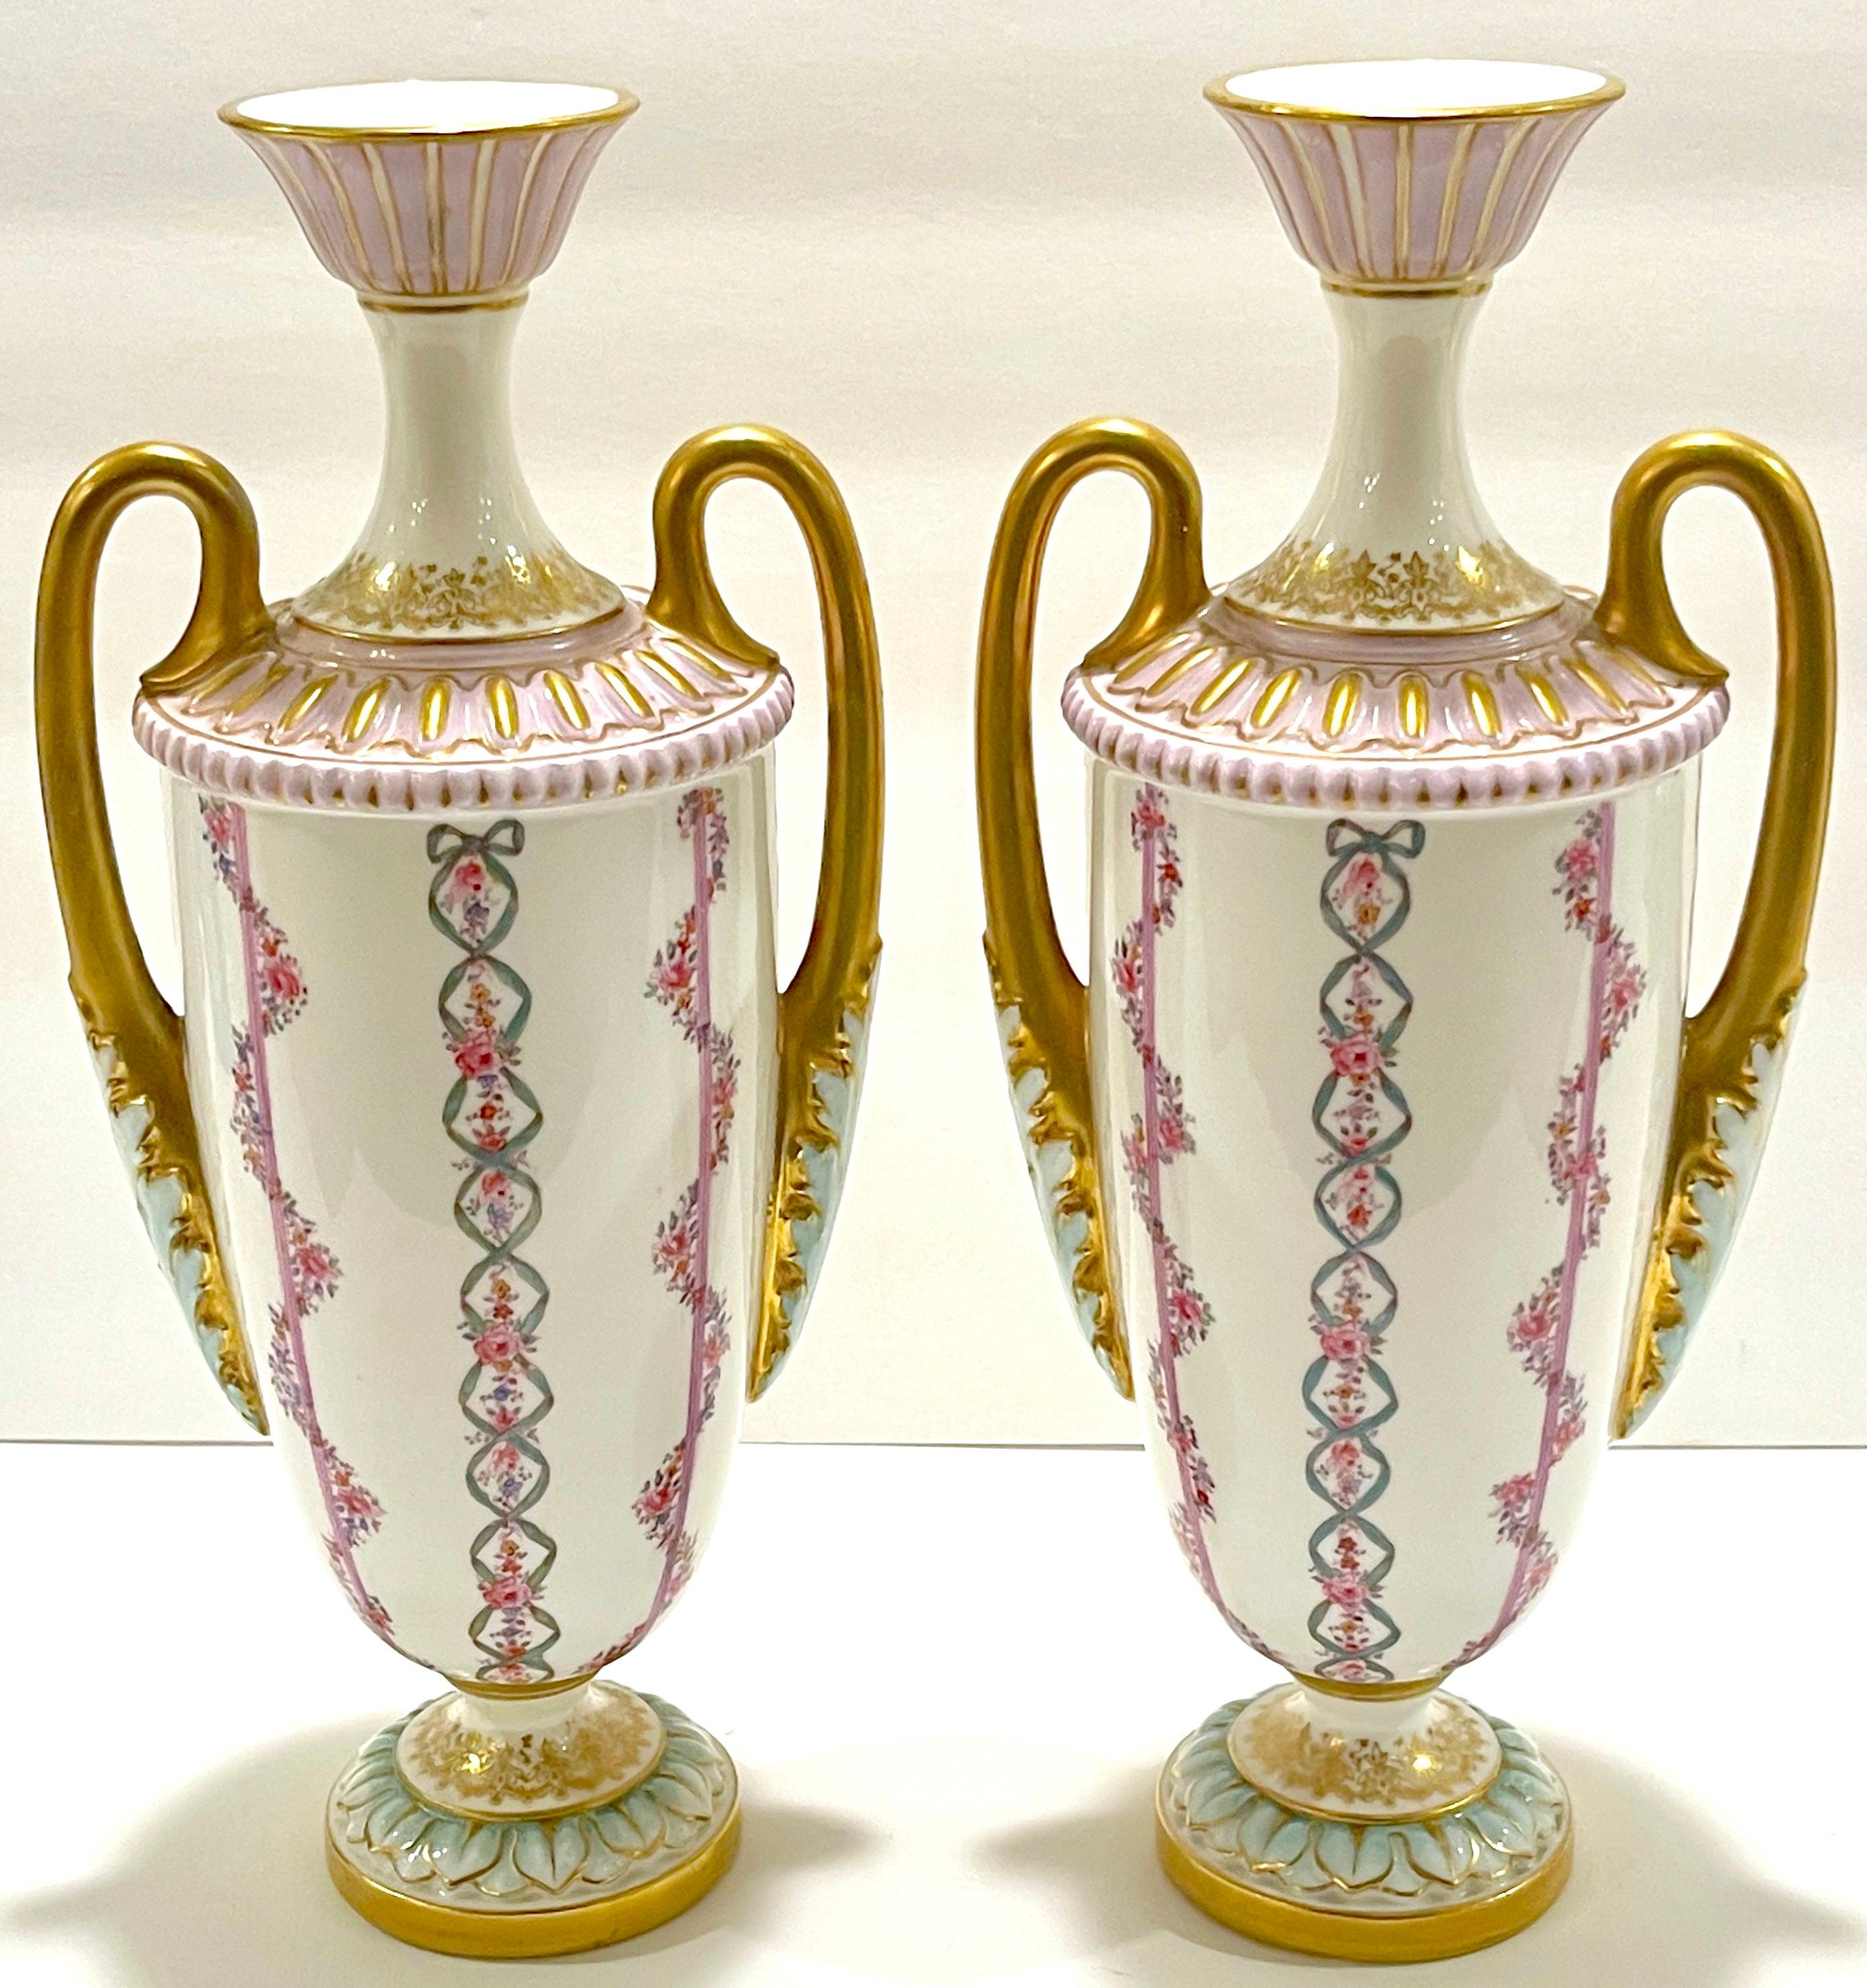 Pair of Royal Worcester Transitional Neoclassical style vases, England, 1901.
Date marked with green backs-tamp with five dots to the left and right.
'Leadless Glaze- English Registry Mark'

Each vase shape #2129, with stylized plume top, fitted